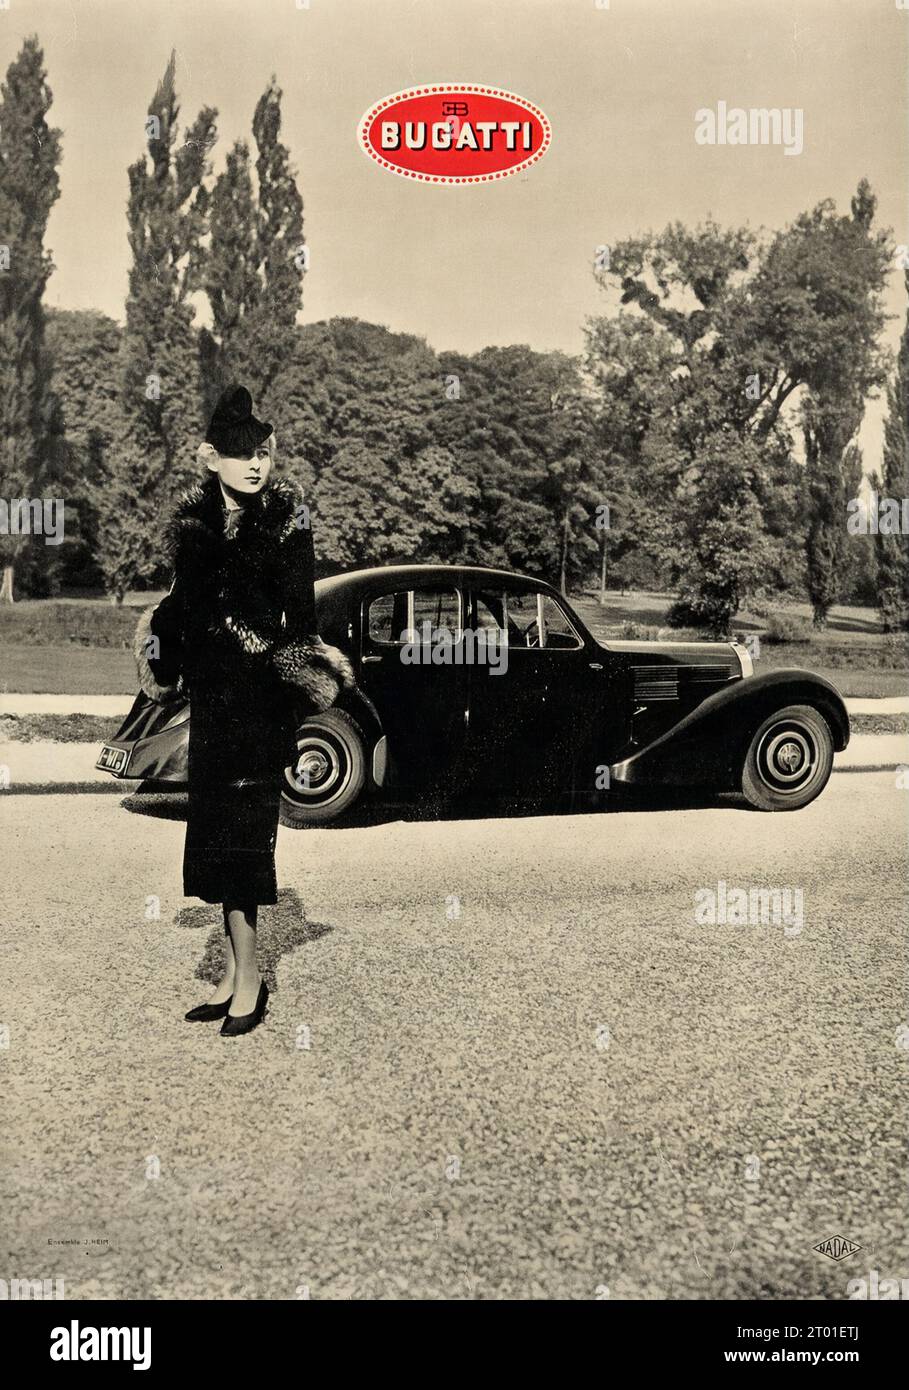 Bugatti (c.1930s). Vintage car - Old Advertising Poster for Bugatti, feat. a dressed up lady. Stock Photo